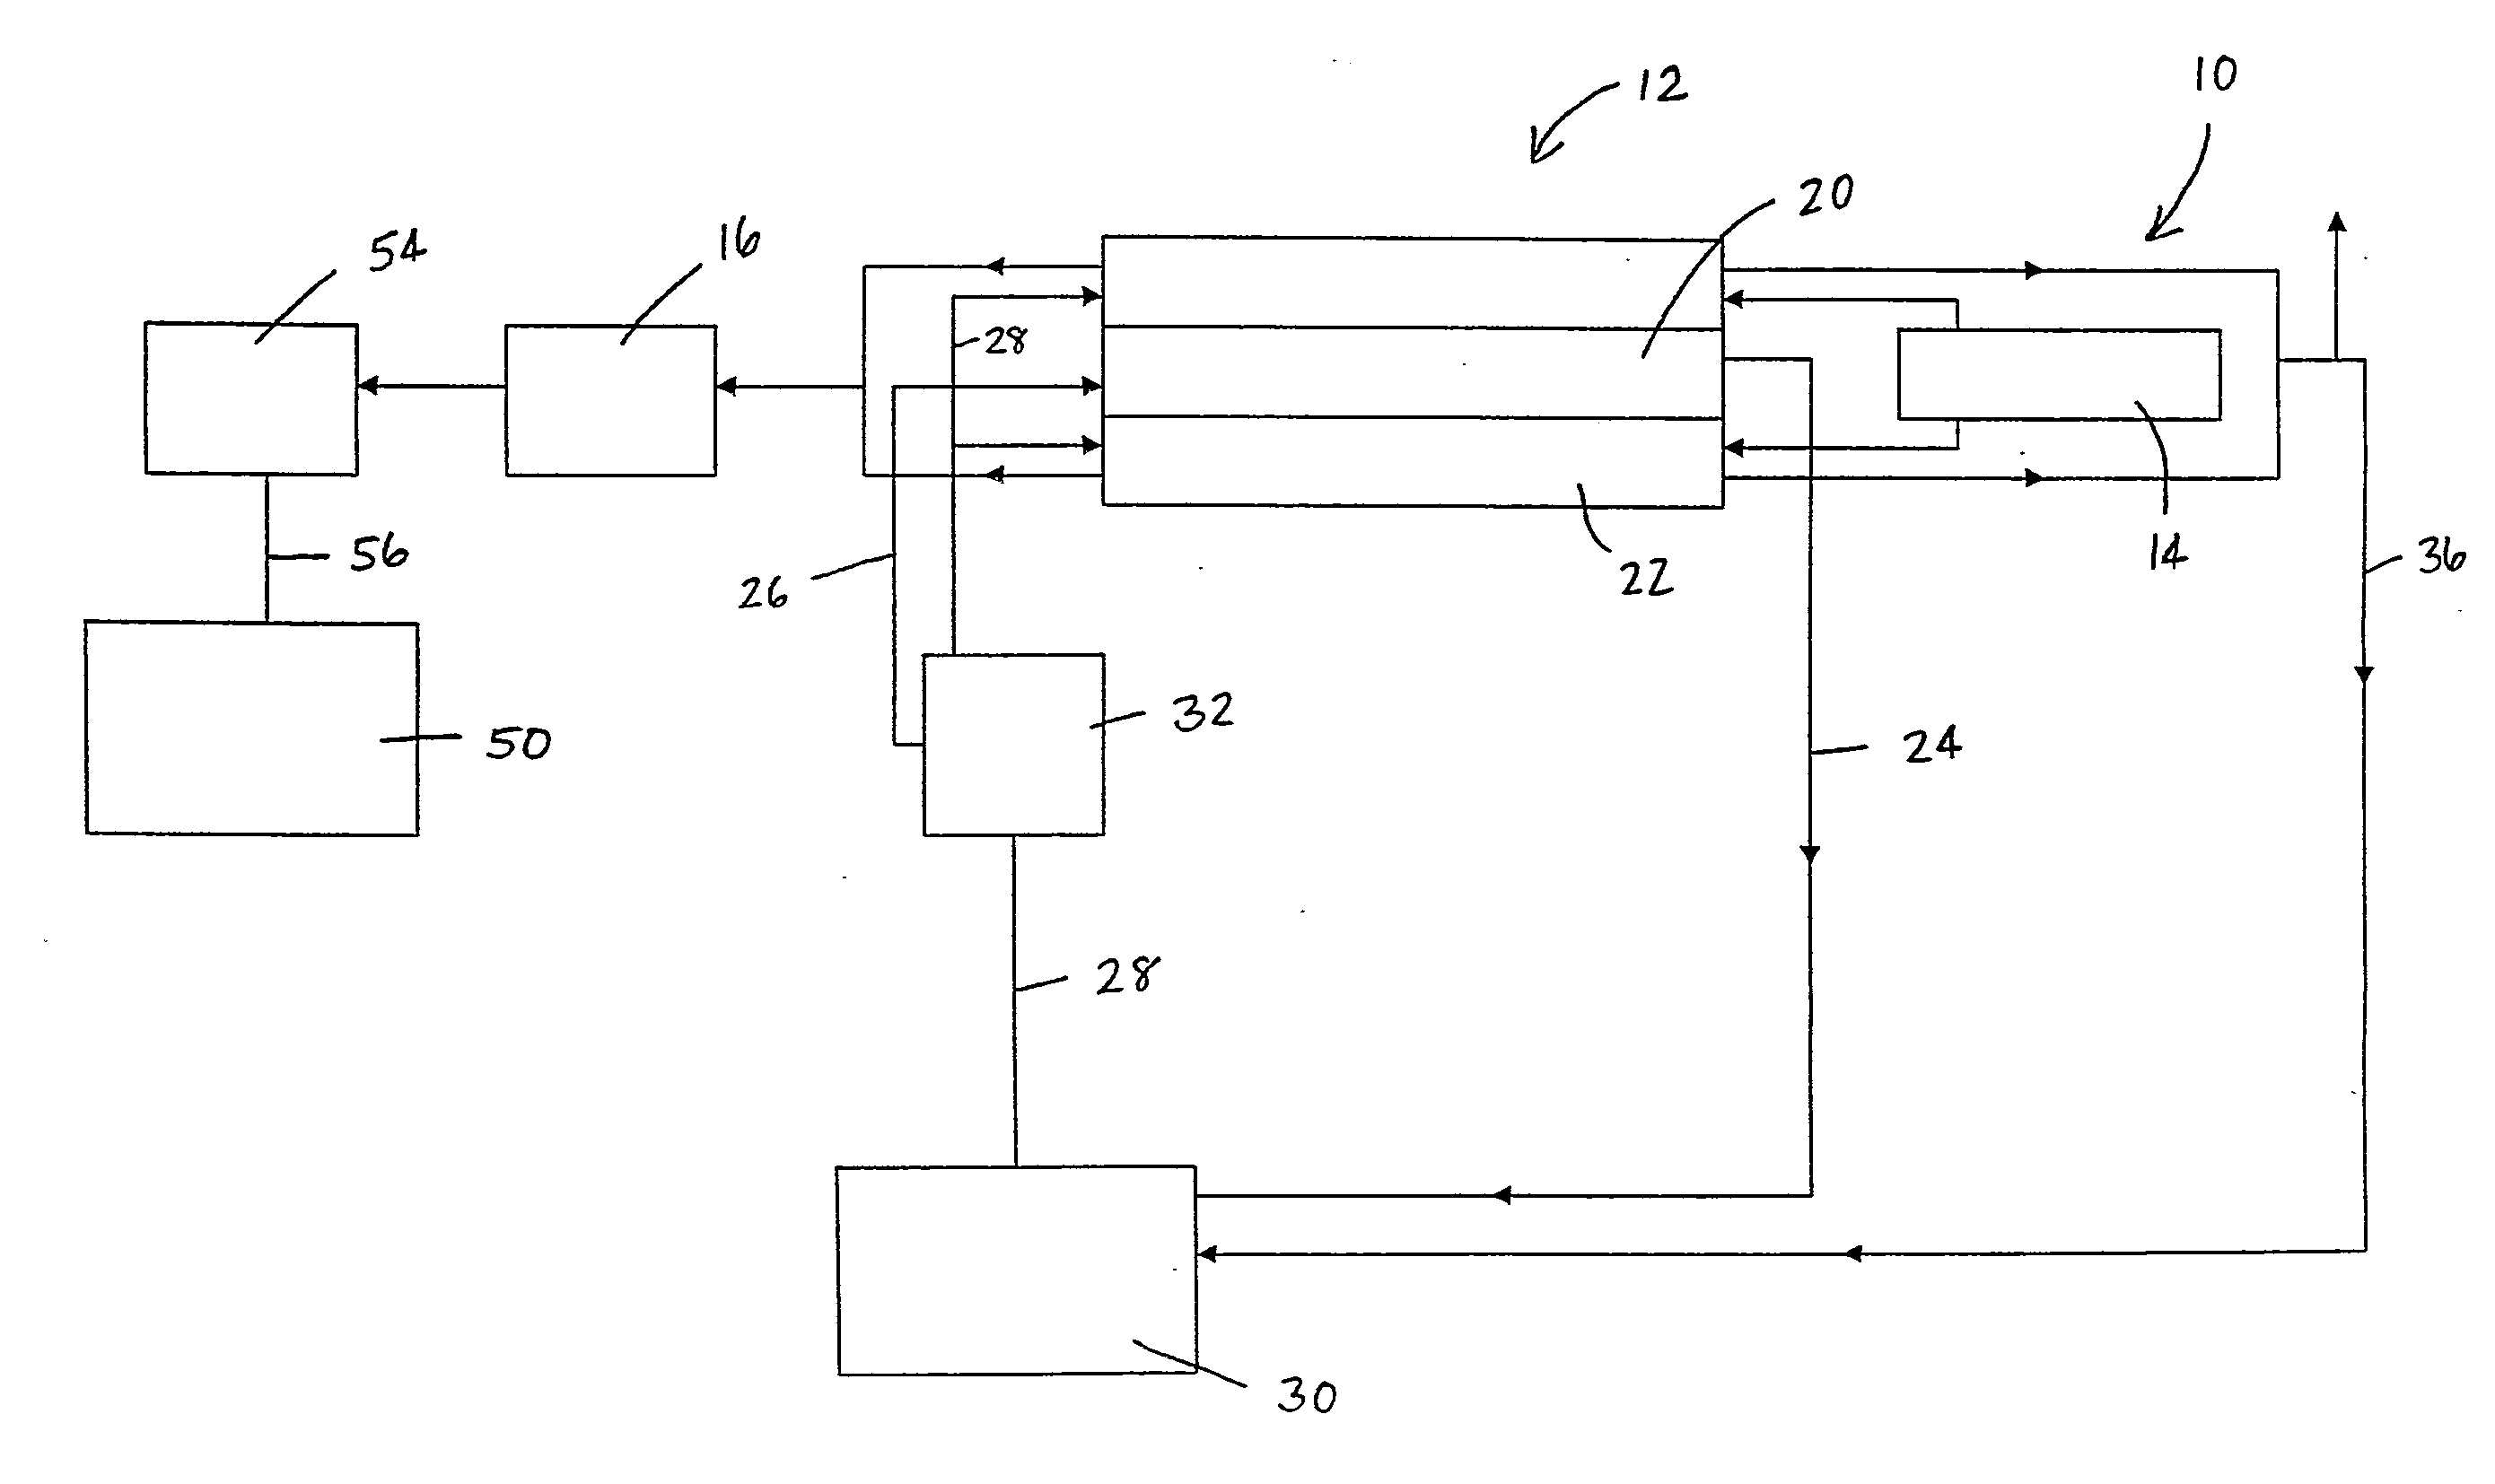 Process, system and apparatus for passivating carbonaceous materials